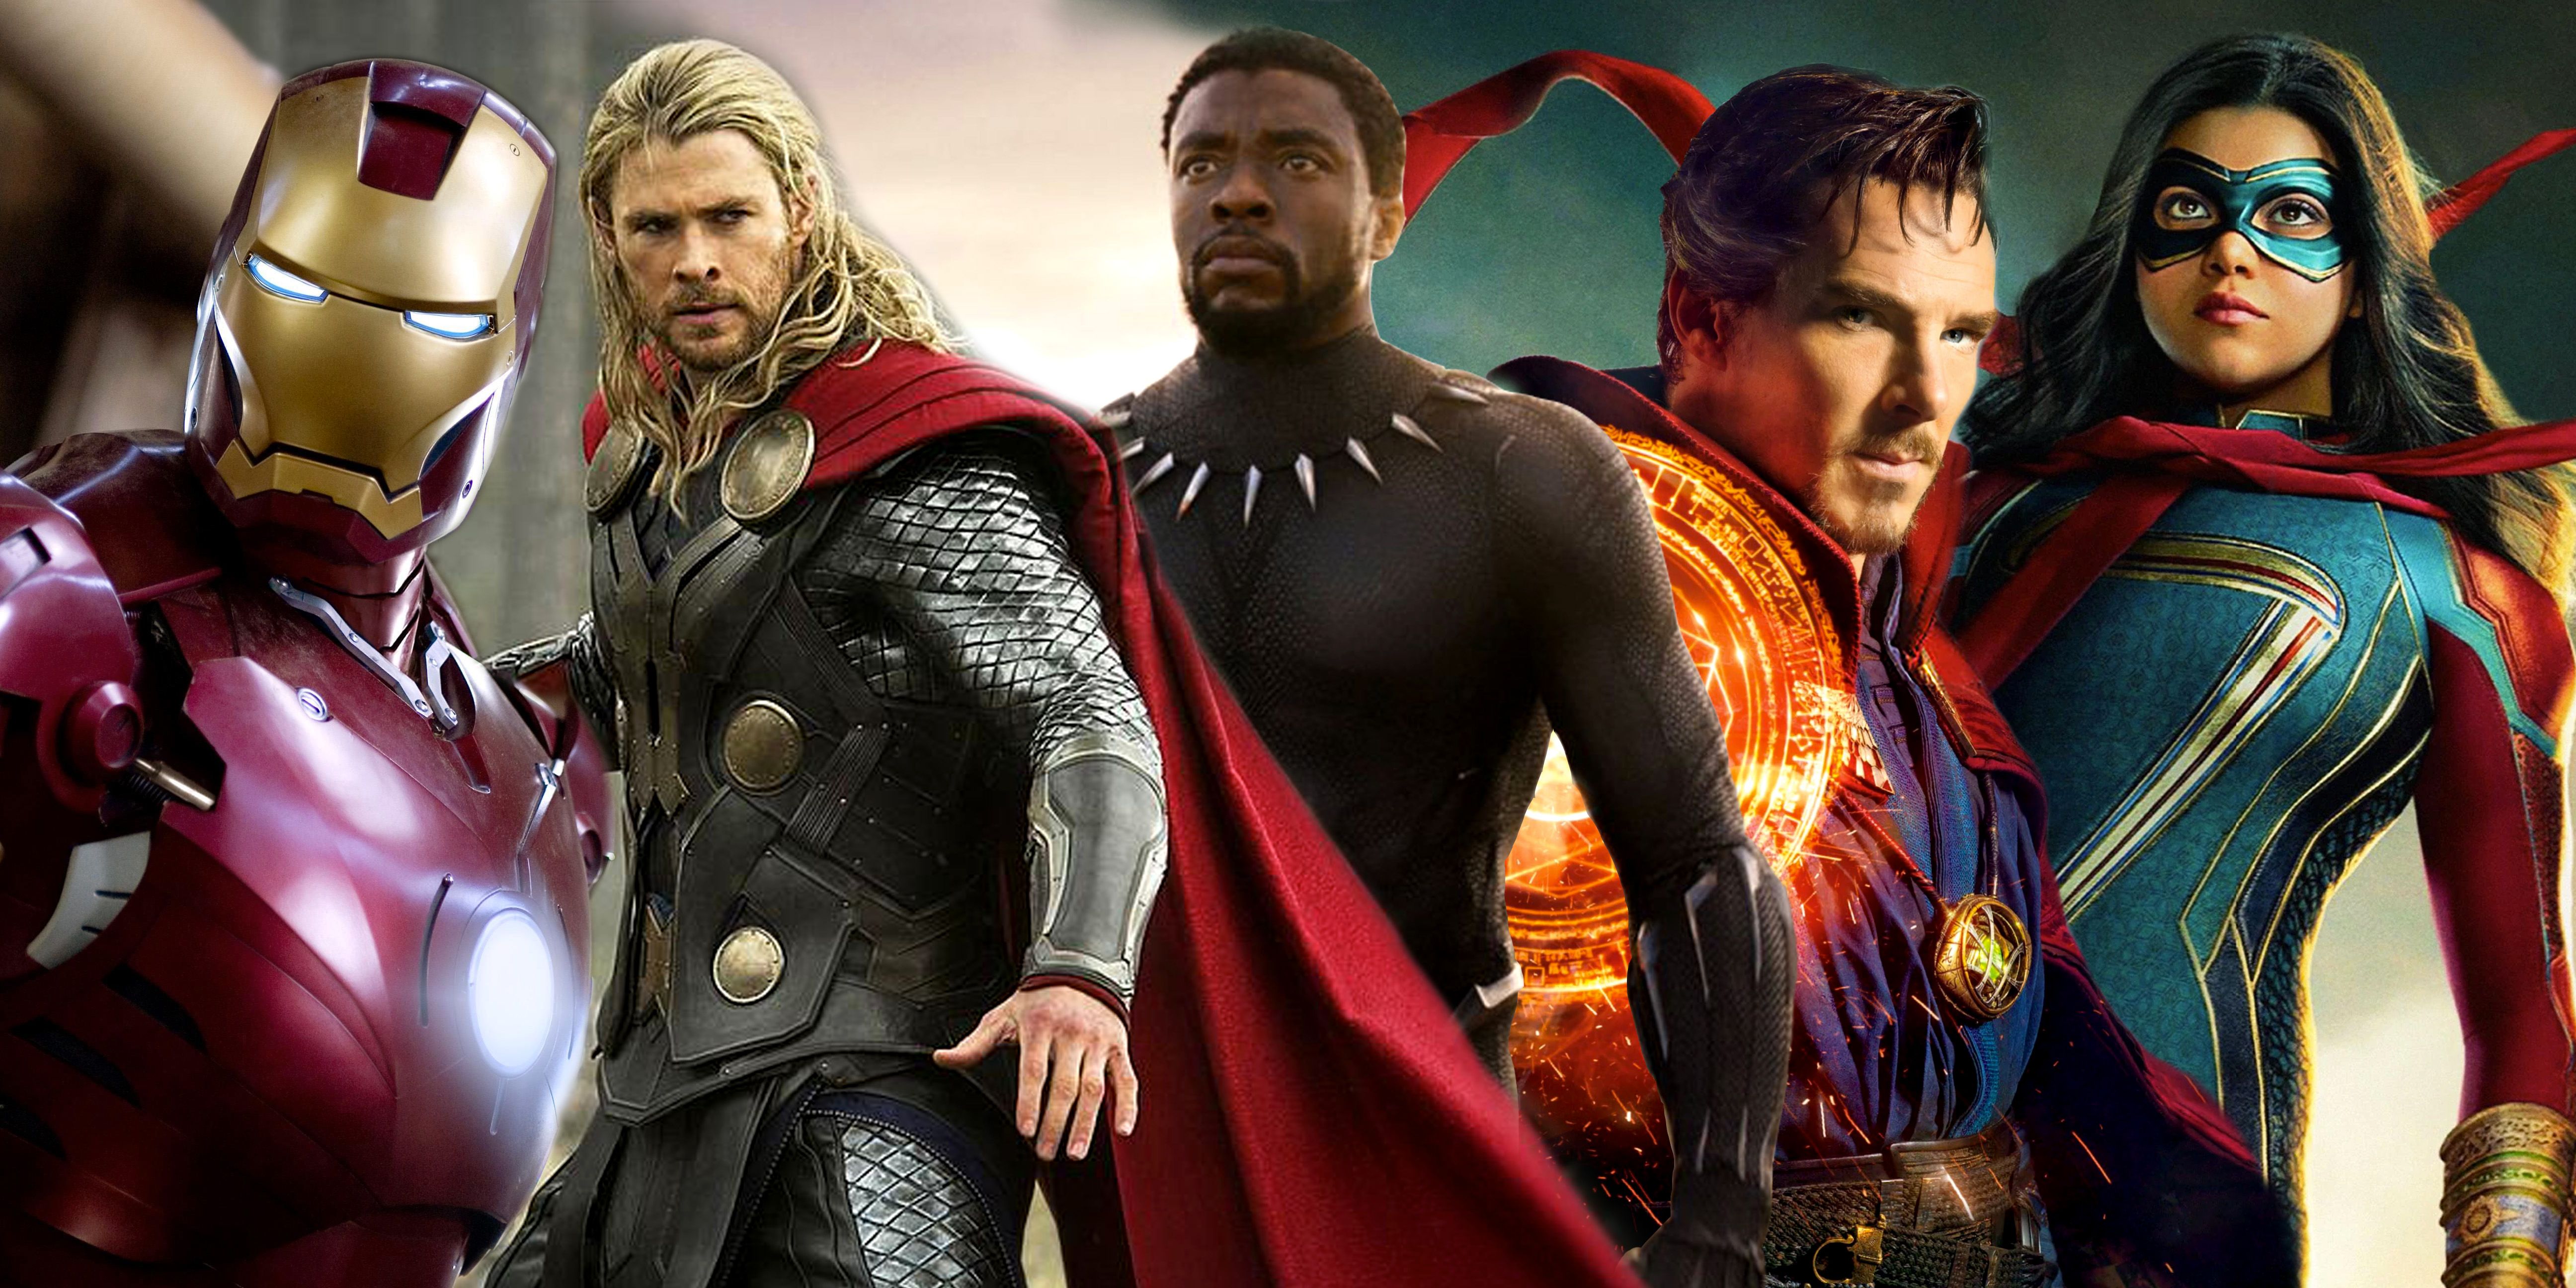 Key characters from each MCU phase: Iron Man, Thor, Black Panther, Dr. Strange, and Ms. Marvel